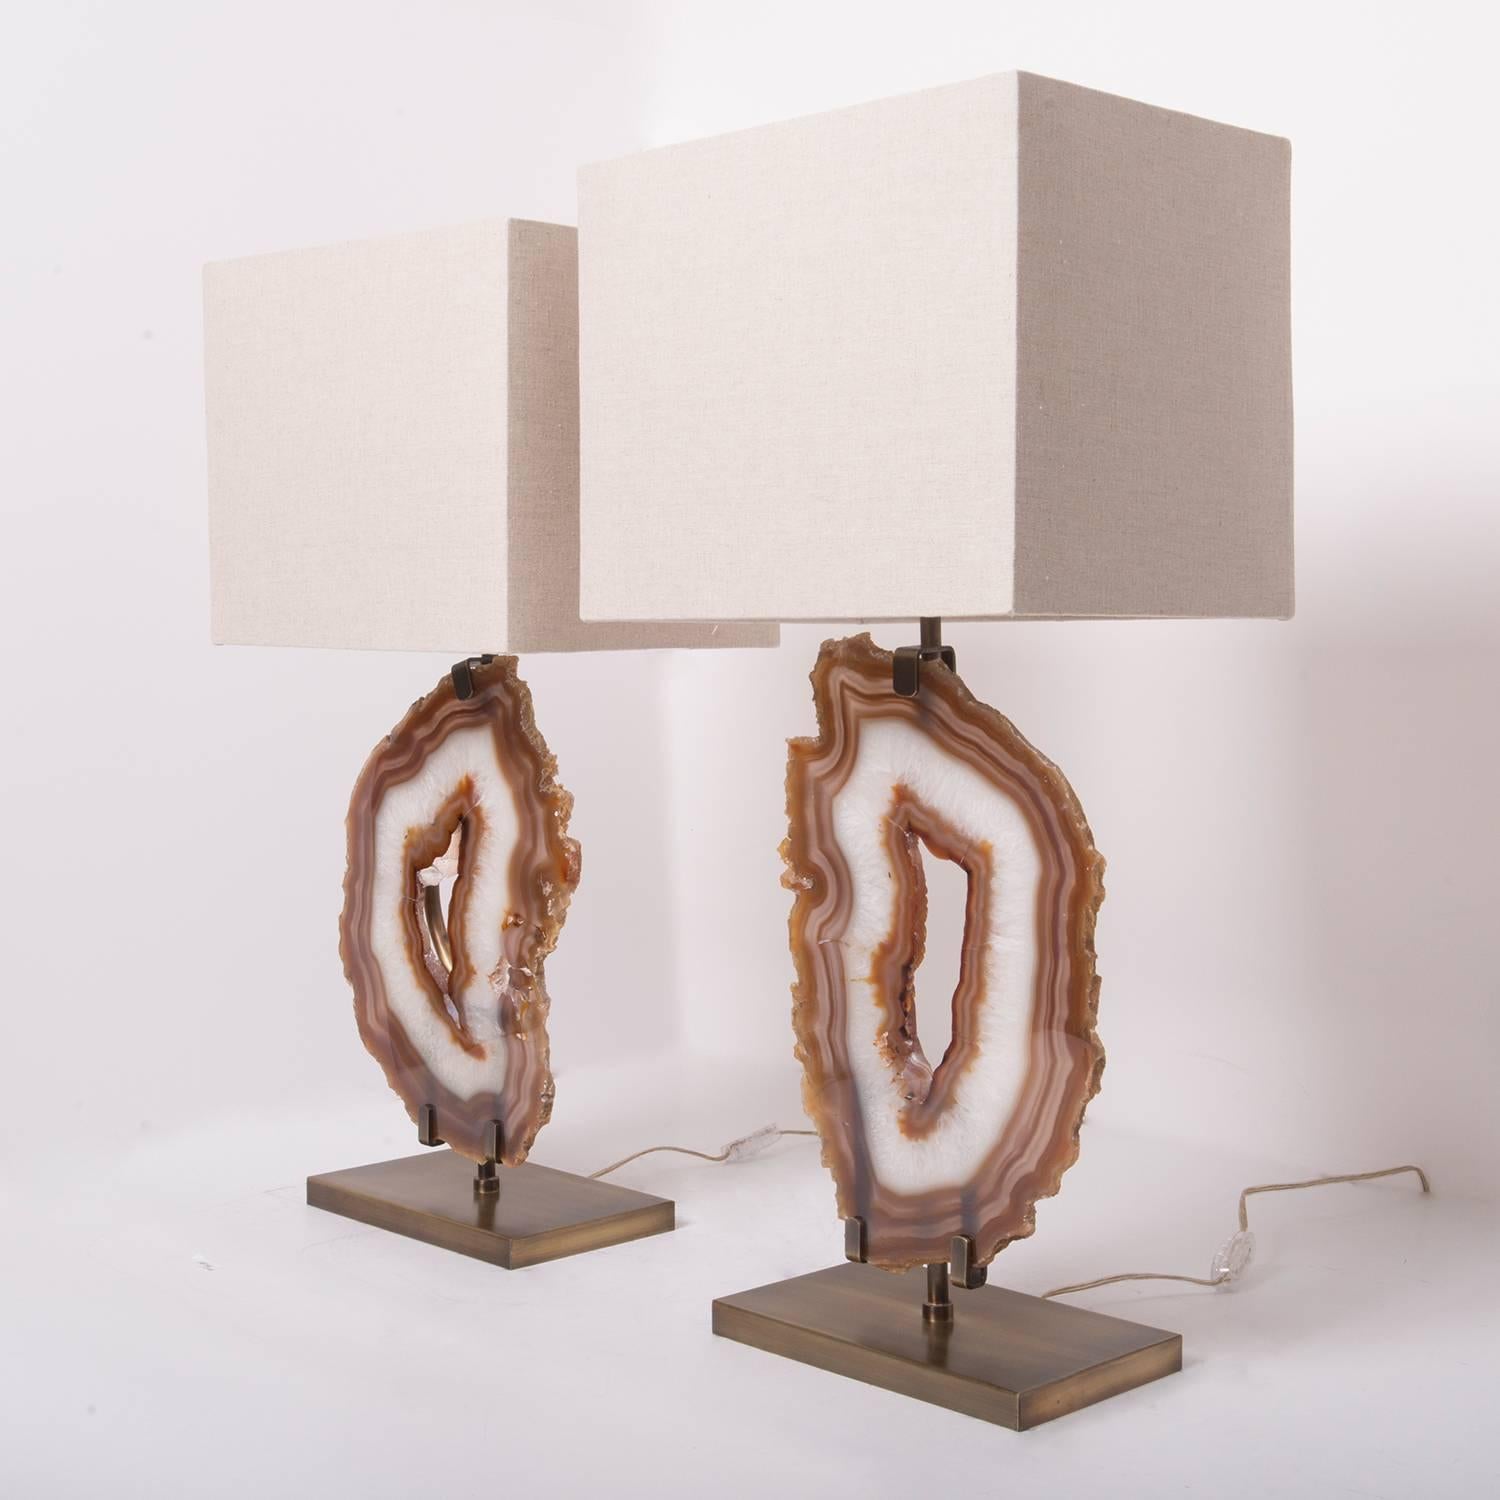 Organic Modern Pair of Brazilian Agate Table Lamps, Brushed Brass Base with Beige Linen Shade